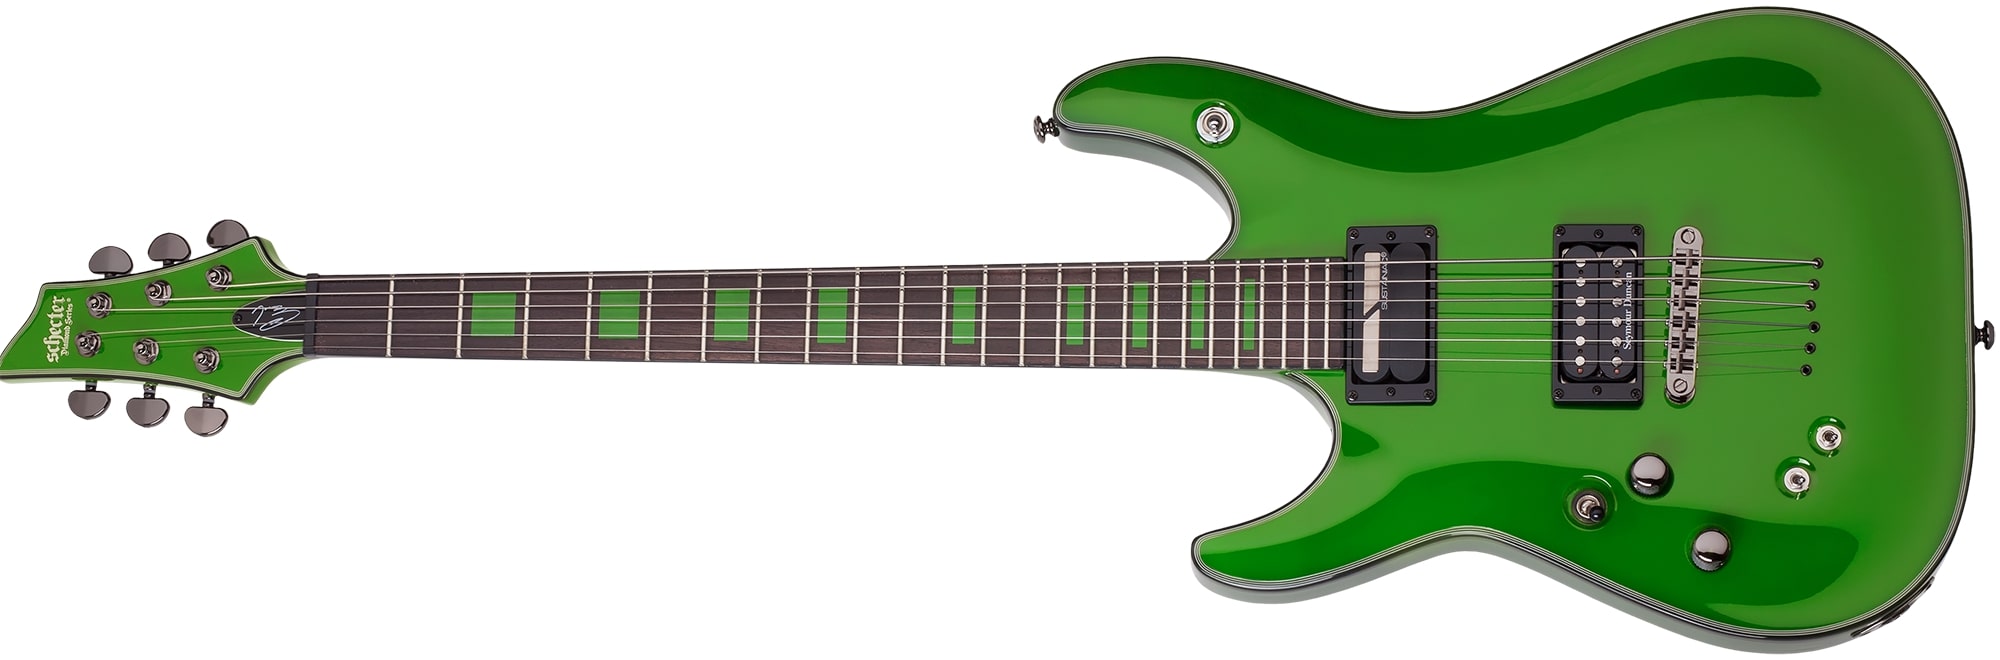 Schecter Kenny Hickey C-1 EX S Left Handed Electric Guitar, Steele Green 229-SHC